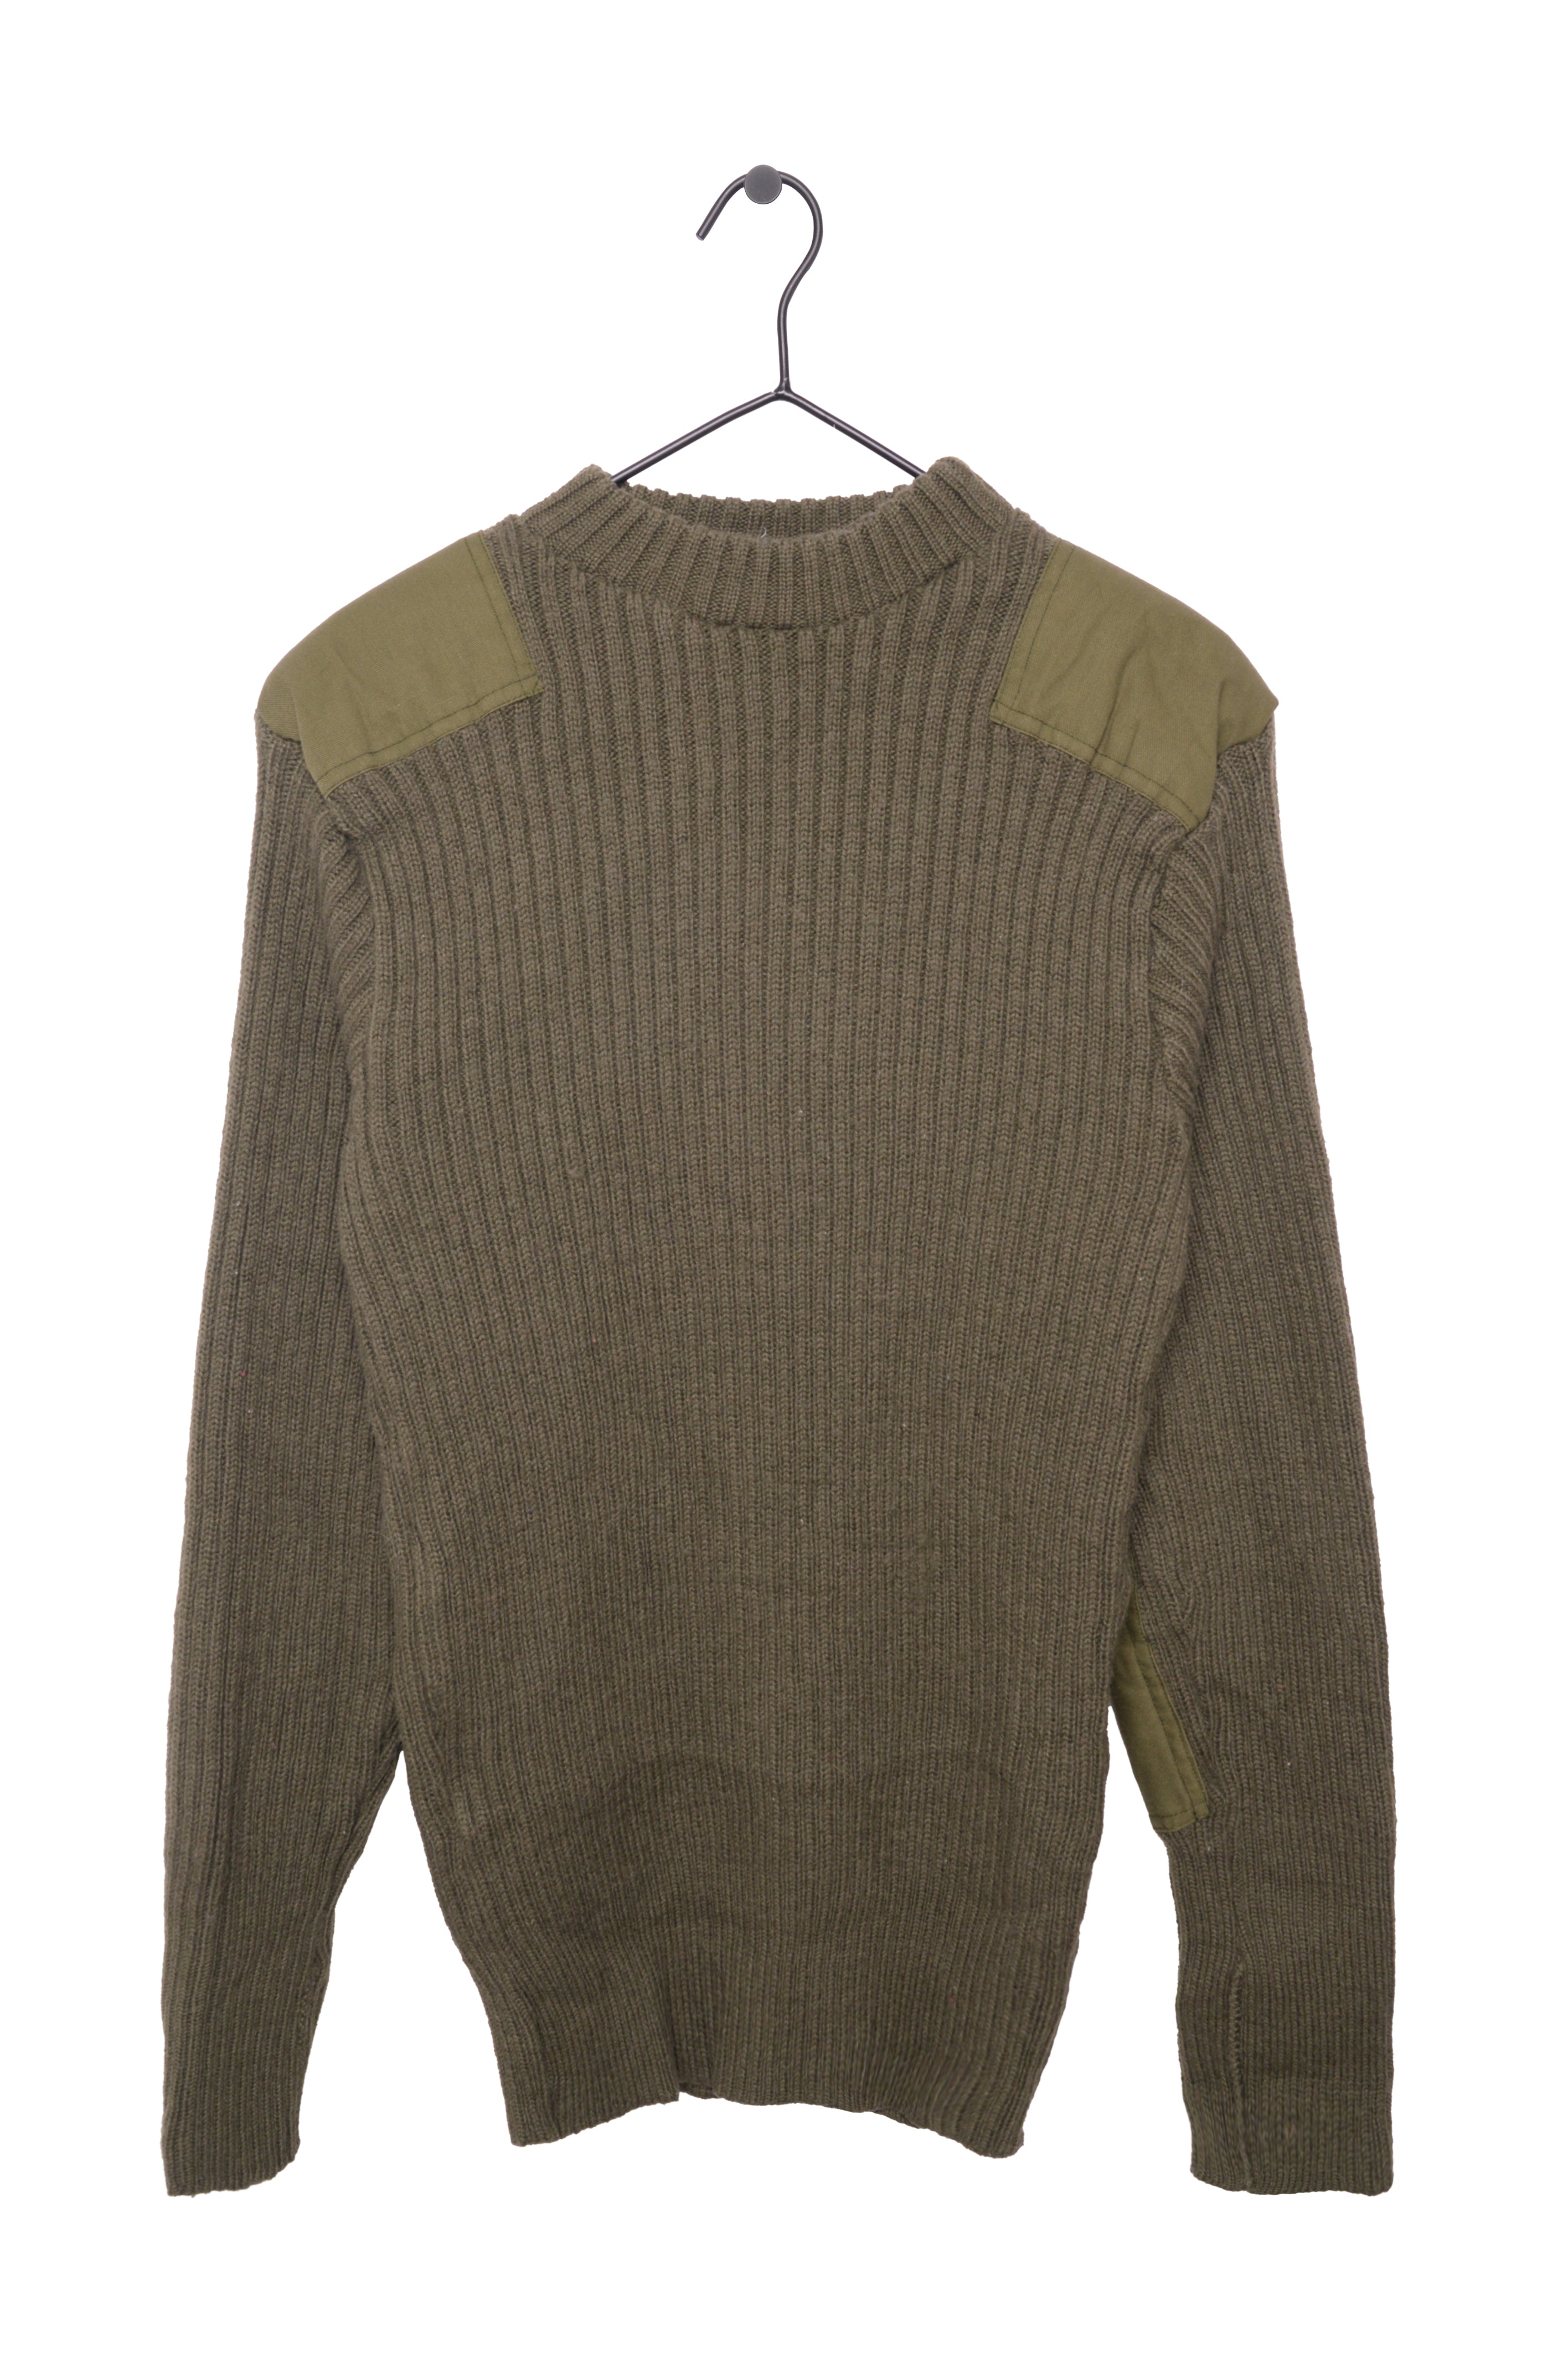 Vintage Elbow Patch Wool Sweater - The Vintage Twin